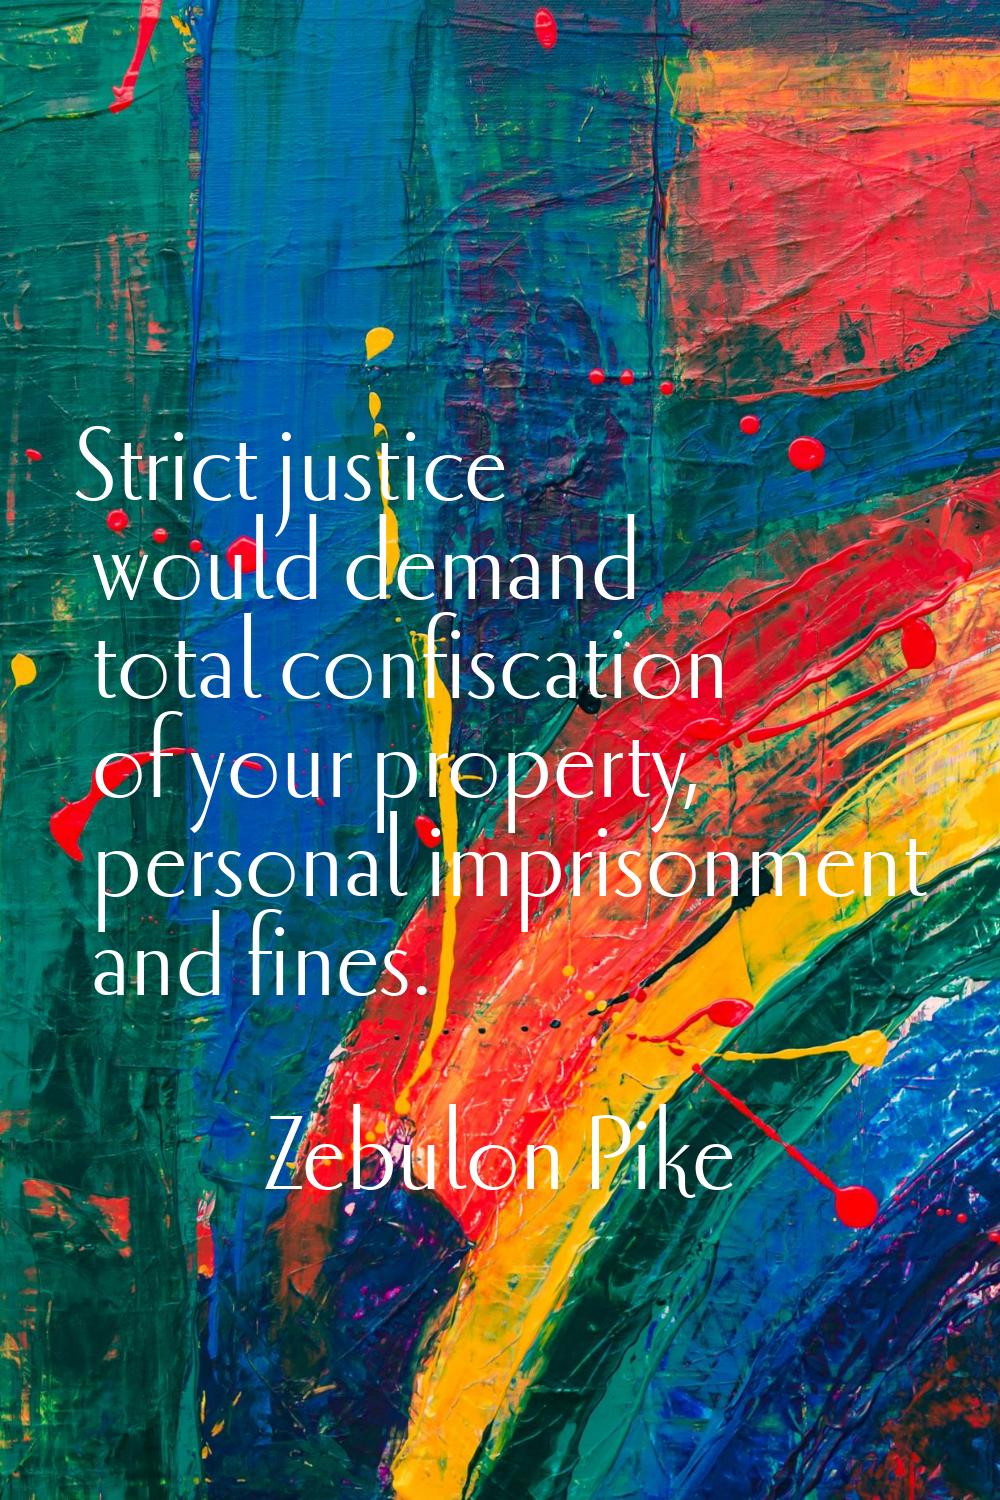 Strict justice would demand total confiscation of your property, personal imprisonment and fines.